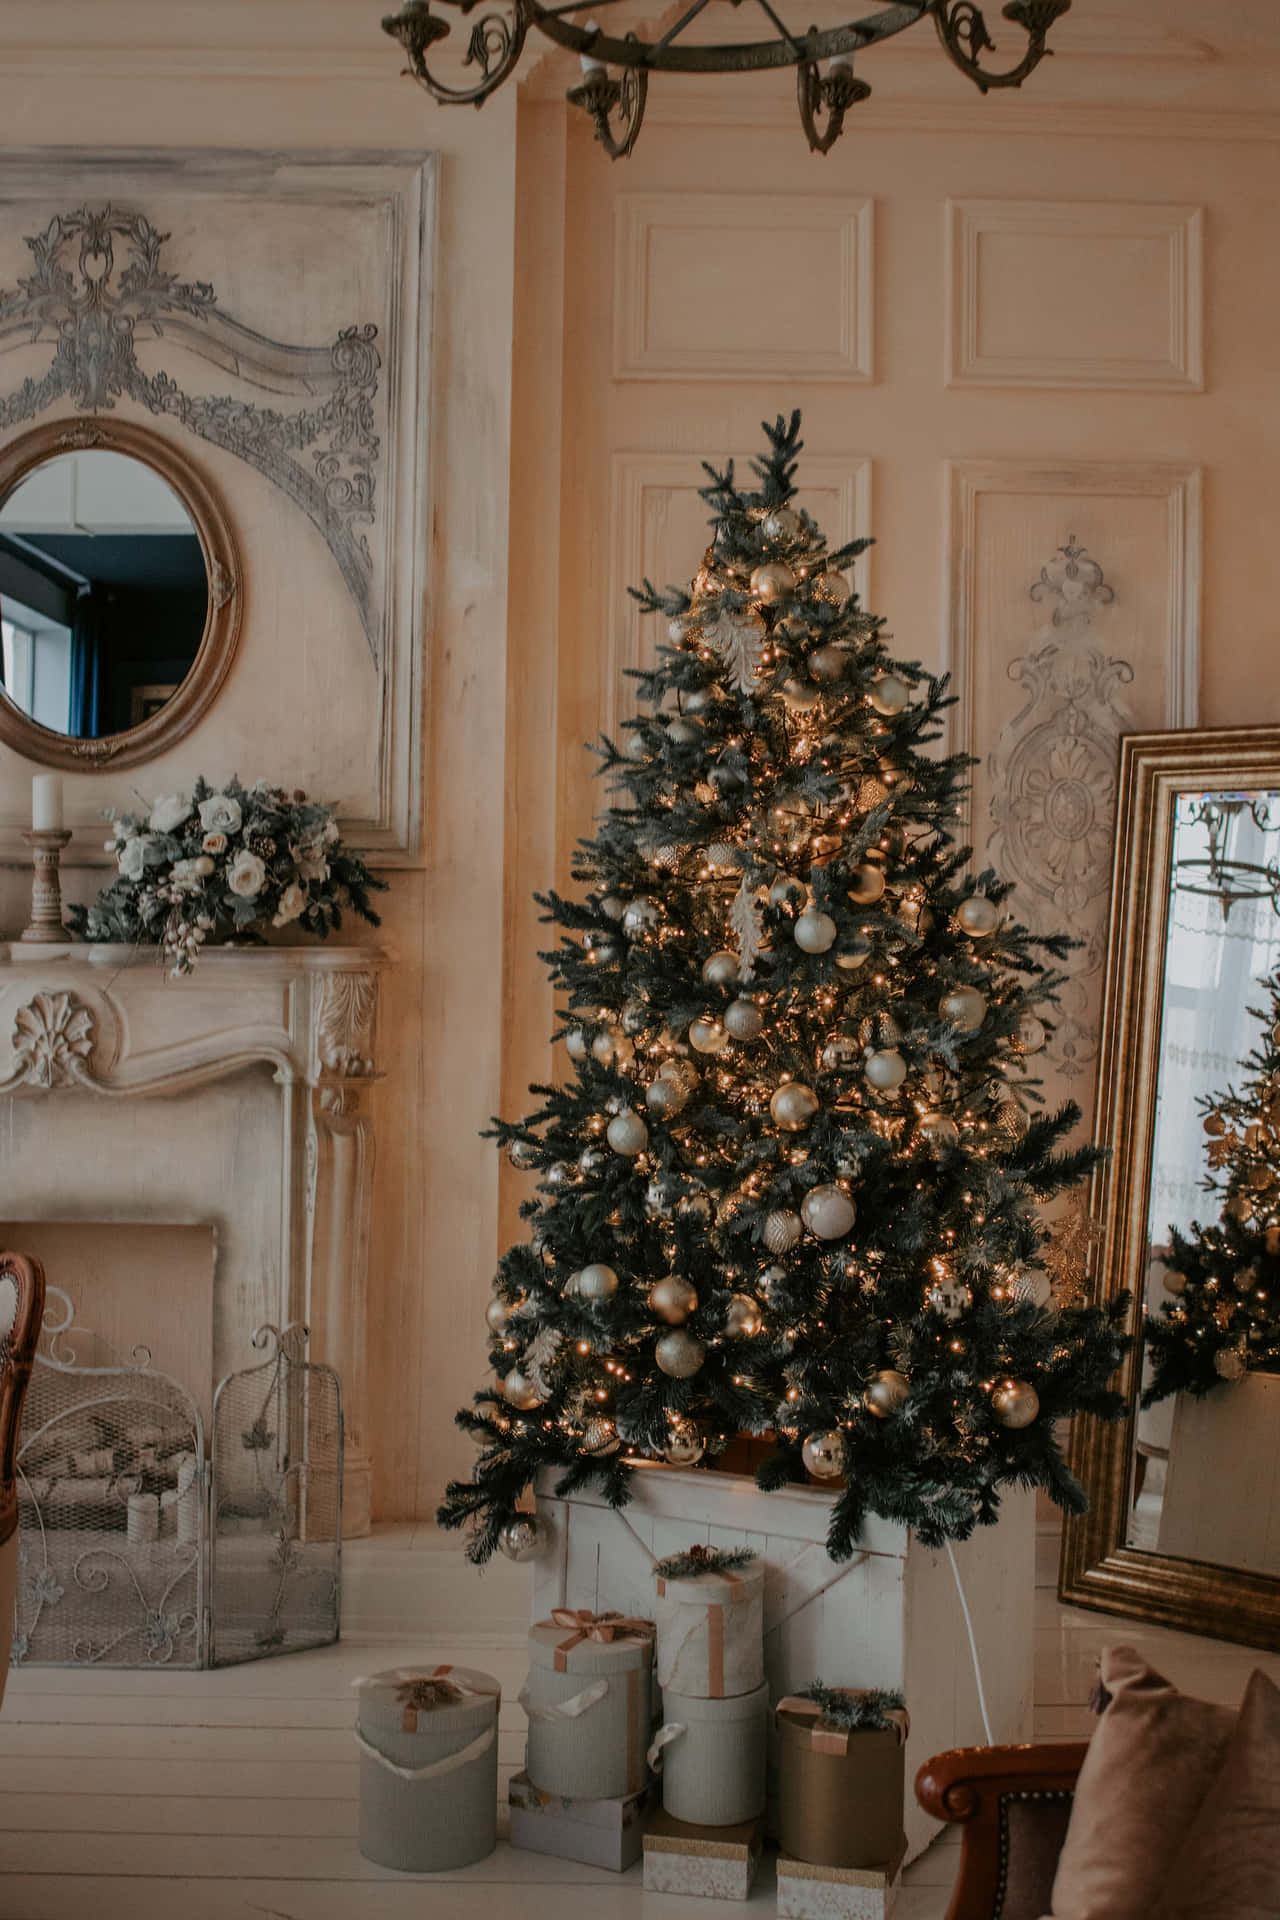 A beautiful aesthetic Christmas tree adorned with white ornaments, filled with festive cheer. Wallpaper